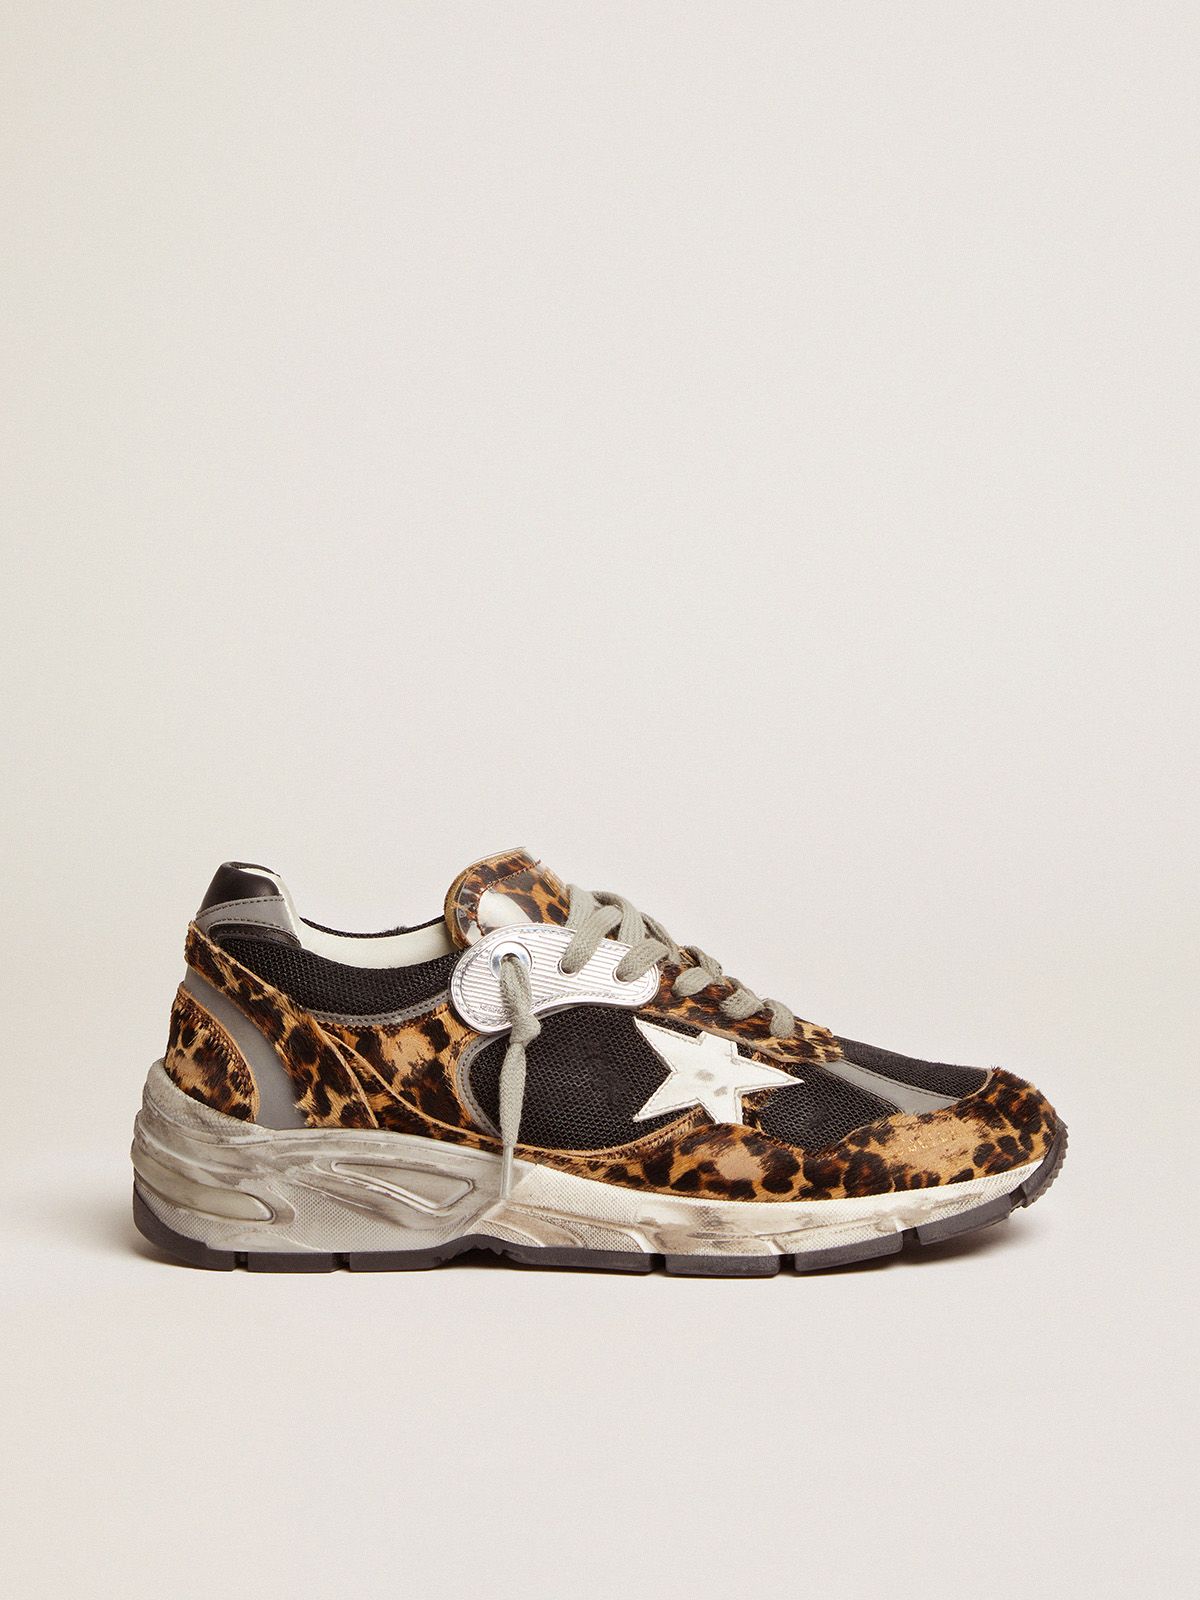 golden goose white leather star with Dad-Star skin pony sneakers leopard-print in